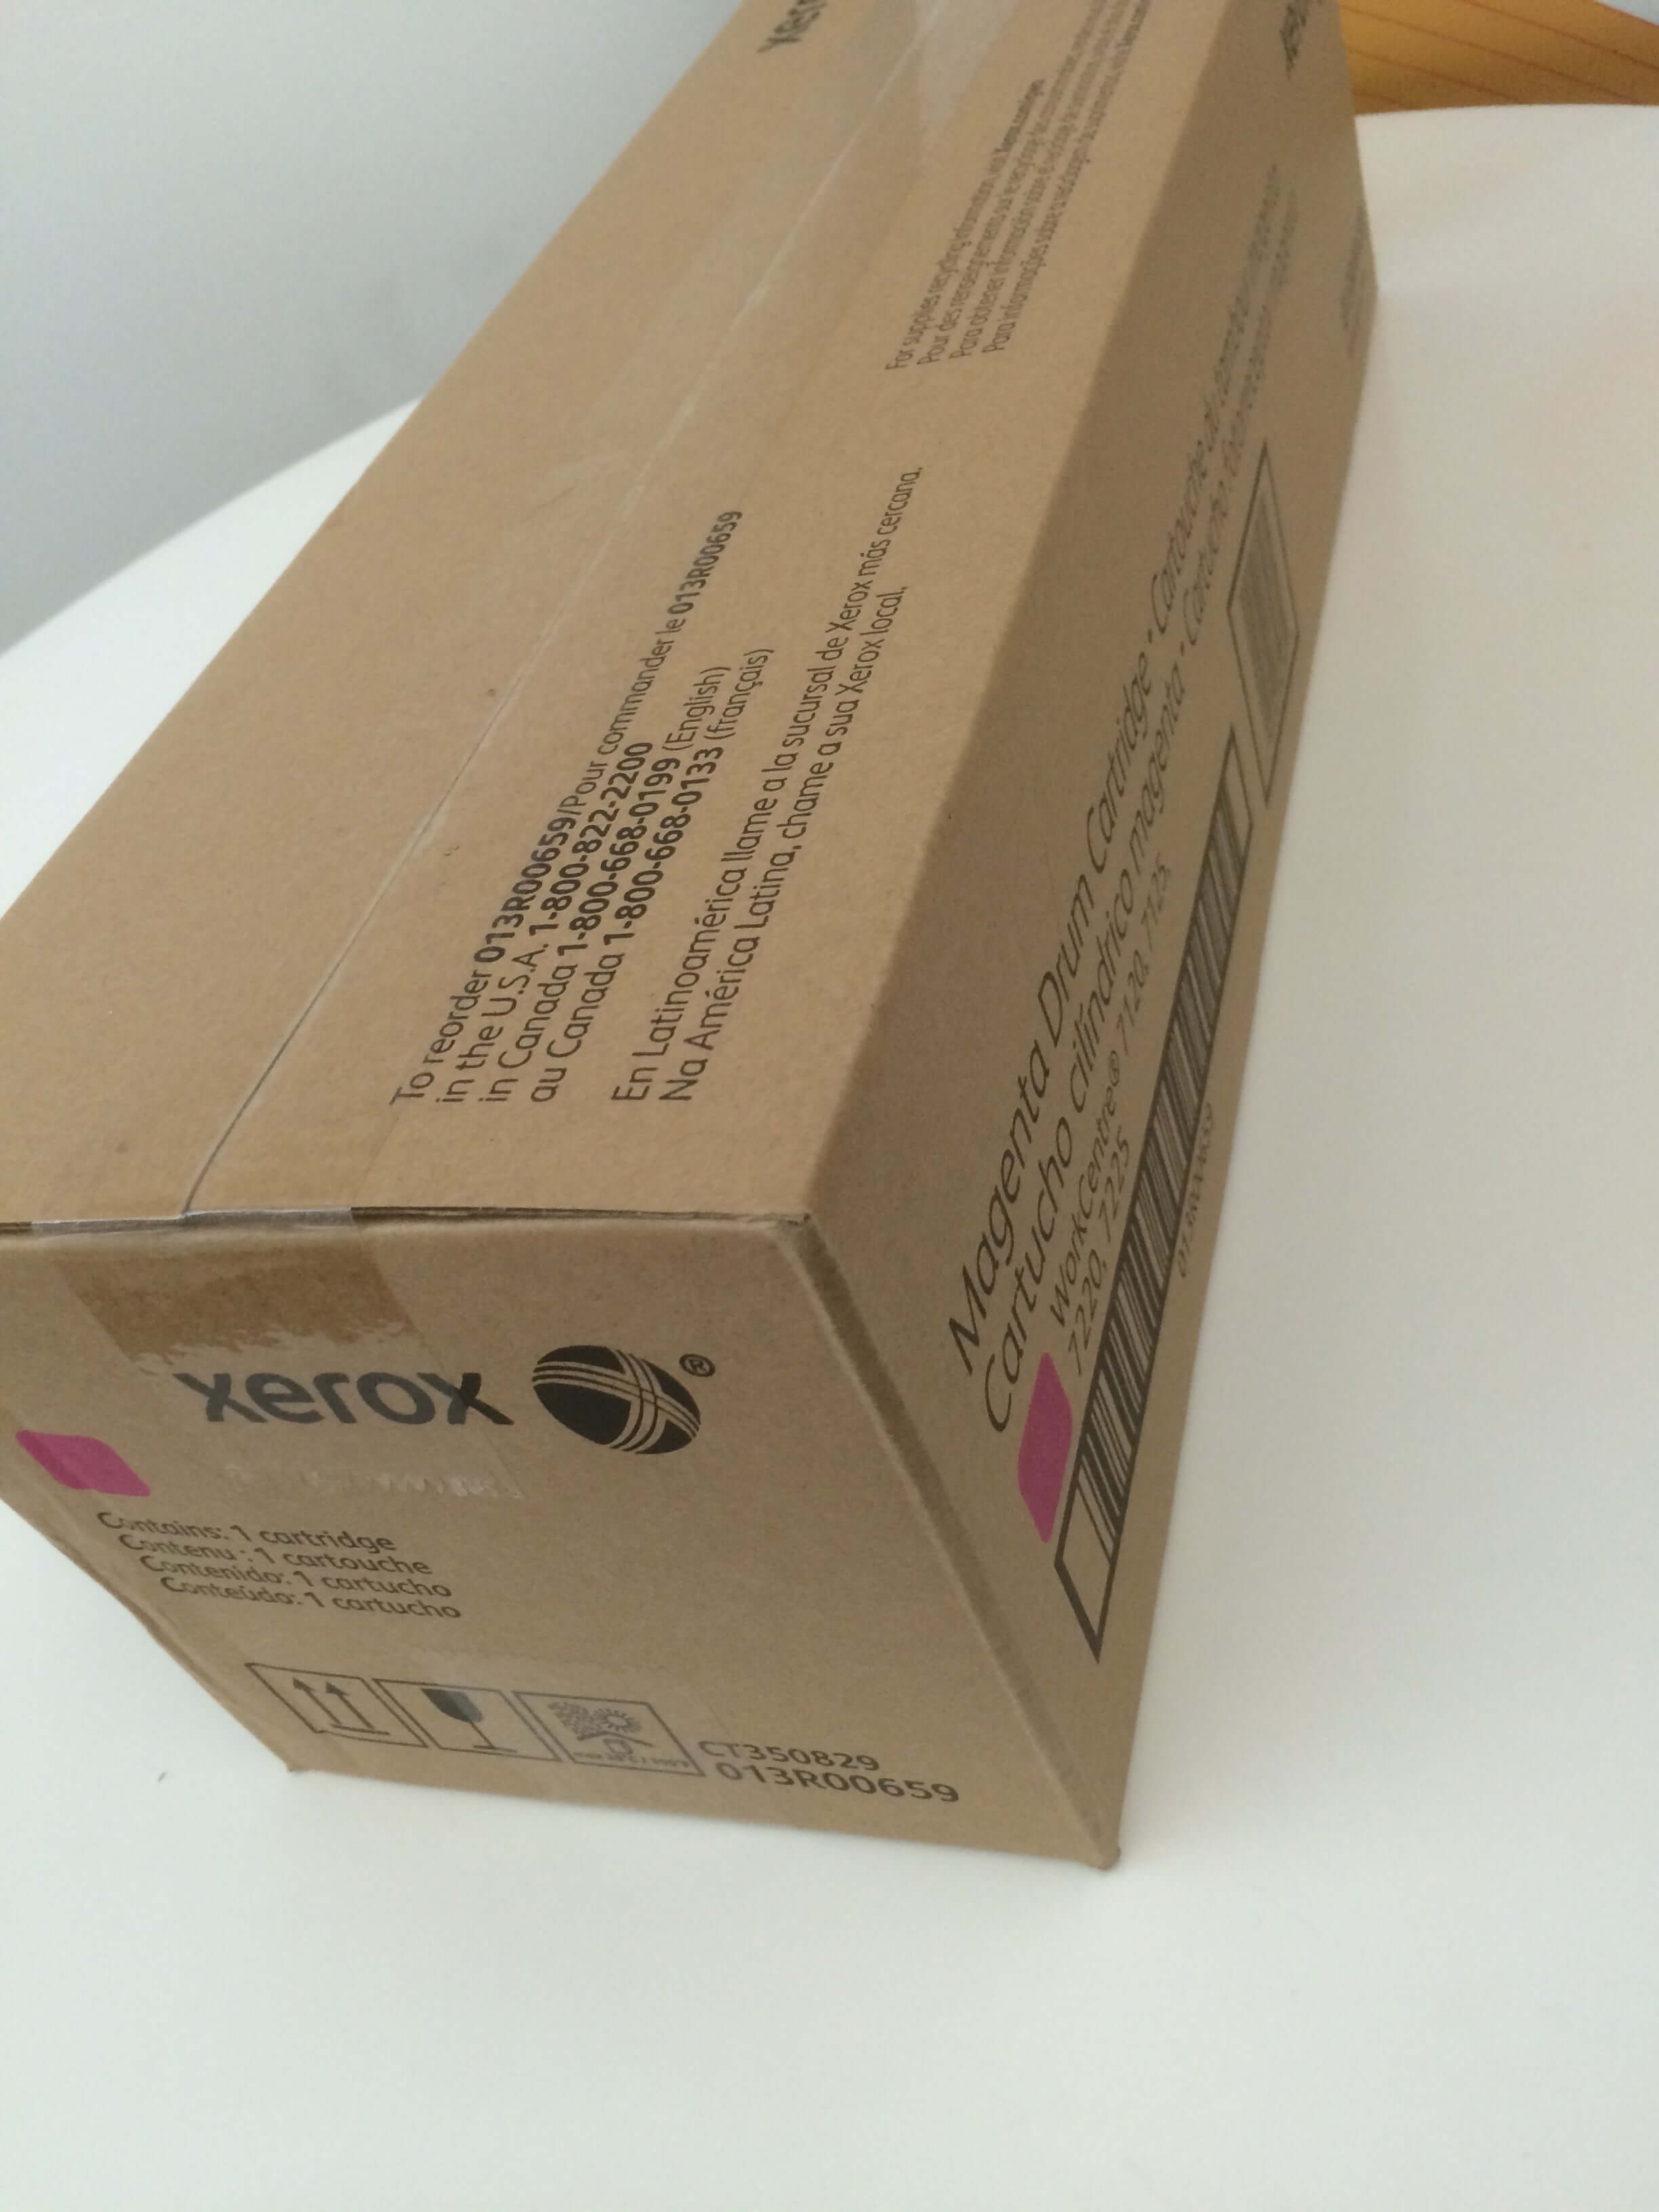 Xerox Magenta Drum Cartridge (51,000) 013R00659 for WorkCentre 7120/7125/7220/7225/7220i/7225i